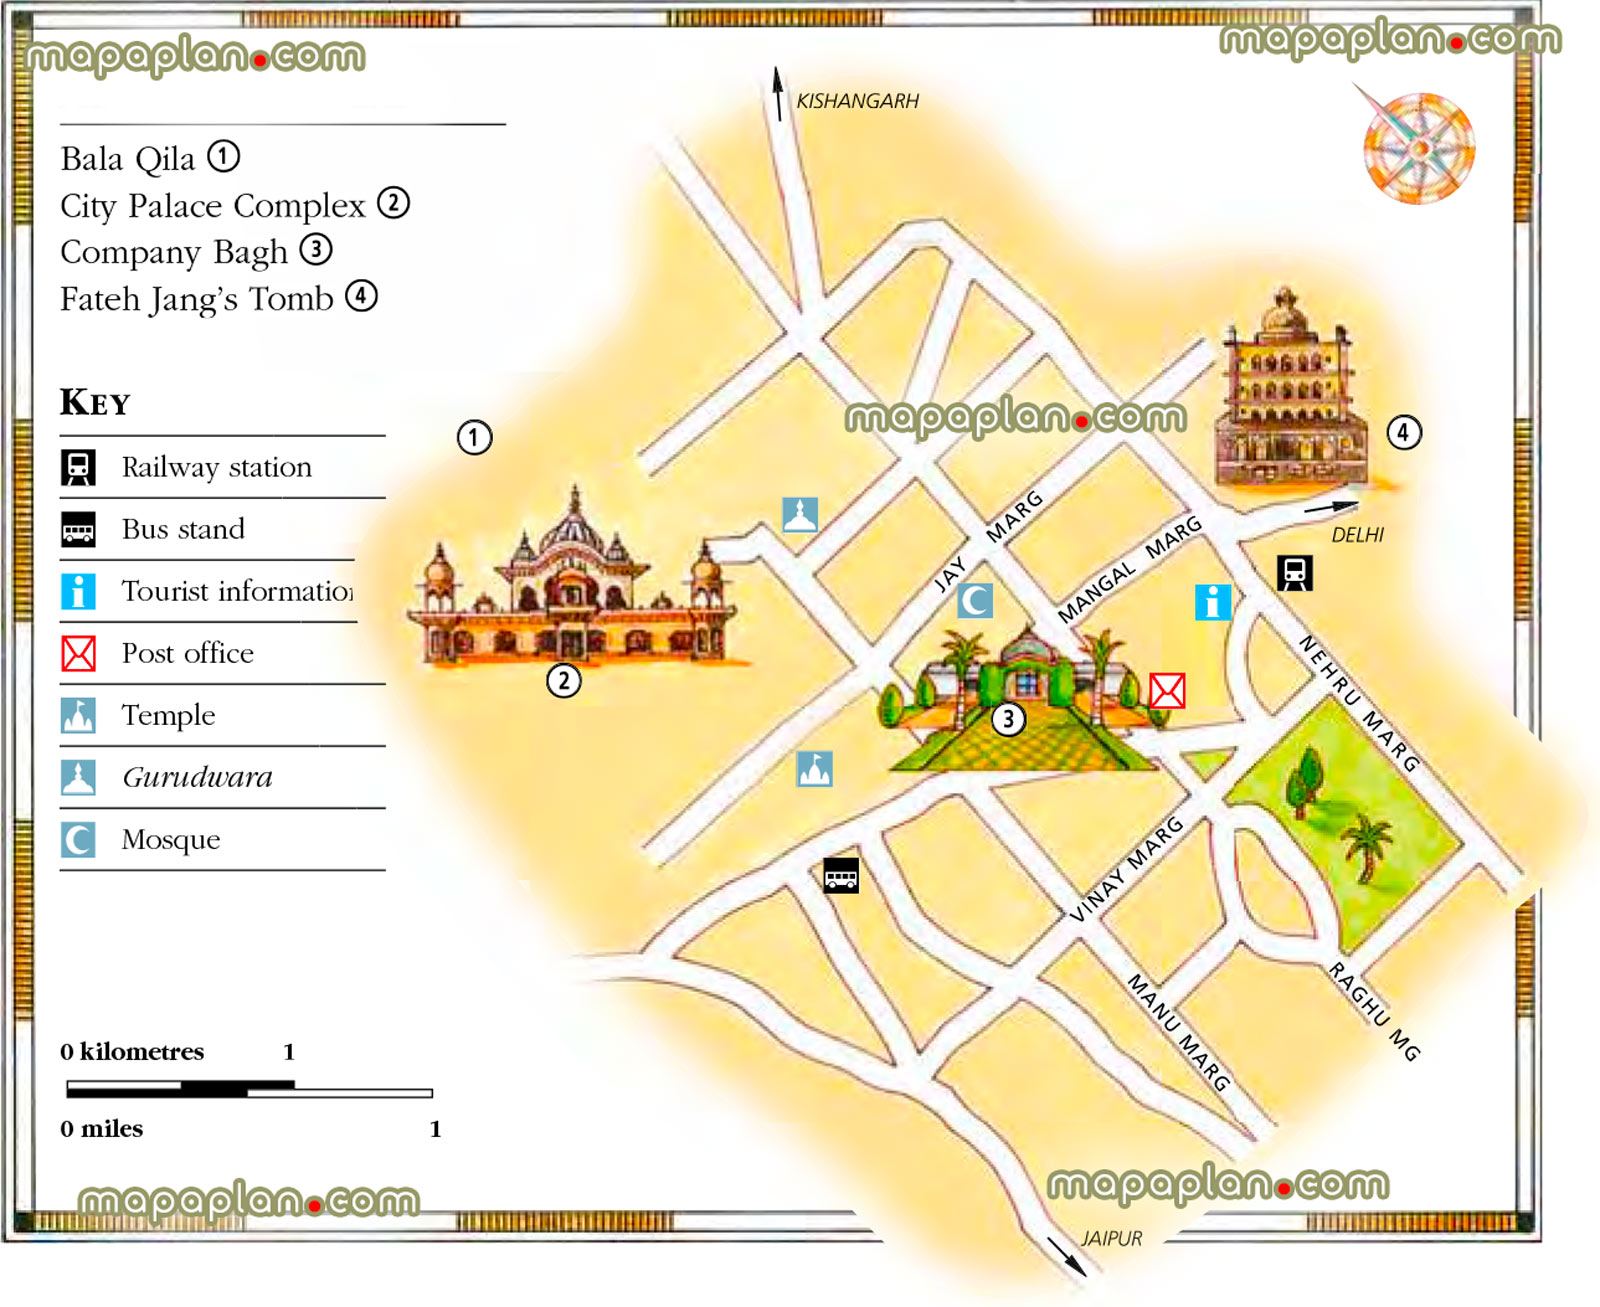 alwar area city palace detailed printable download tourist information centre sightseeing tour guide itinerary planner layout best things do favourite attractions points interest visit touristss Jaipur Top tourist attractions map